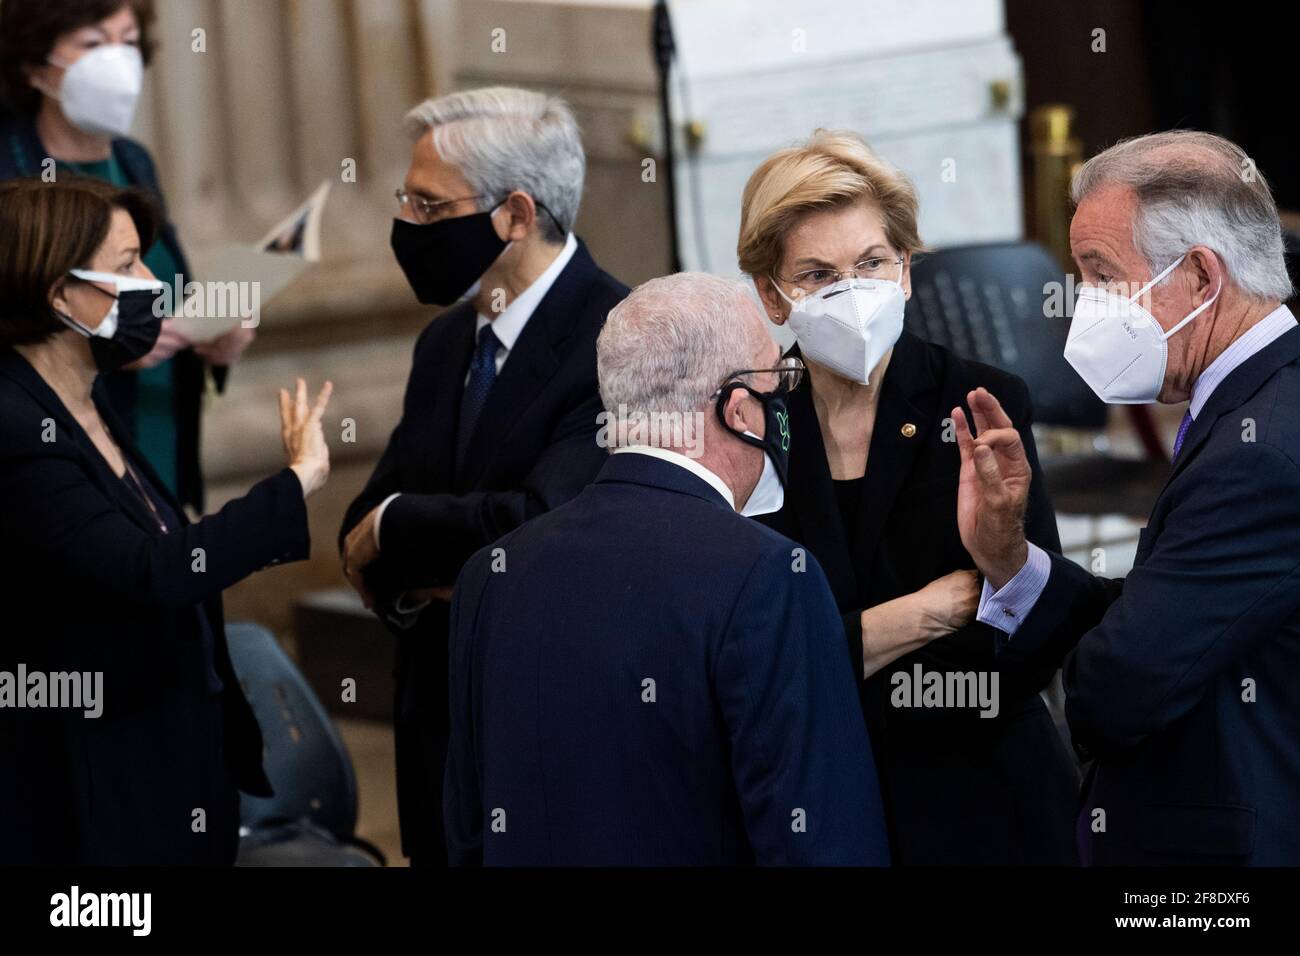 Washington, USA. 13th Apr, 2021. UNITED STATES - APRIL 13: From right, Rep. Richard Neal, D-Mass., Sen. Elizabeth Warren, D-Mass., Rep. Gerry Connolly, D-Va., Attorney General Merrick Garland, Sen. Amy Klobuchar, D-Minn., and Sen. Susan Collins, R-Maine, attend the service for U.S. Capitol Officer William “Billy” Evans, before his remains lie in honor in the Capitol Rotunda in Washington, DC, on Tuesday, April 13, 2021. Evans was killed when a driver rammed the north barricade of the Capitol on April 2, 2021. (Photo By Tom Williams/Pool/Sipa USA) Credit: Sipa USA/Alamy Live News Stock Photo